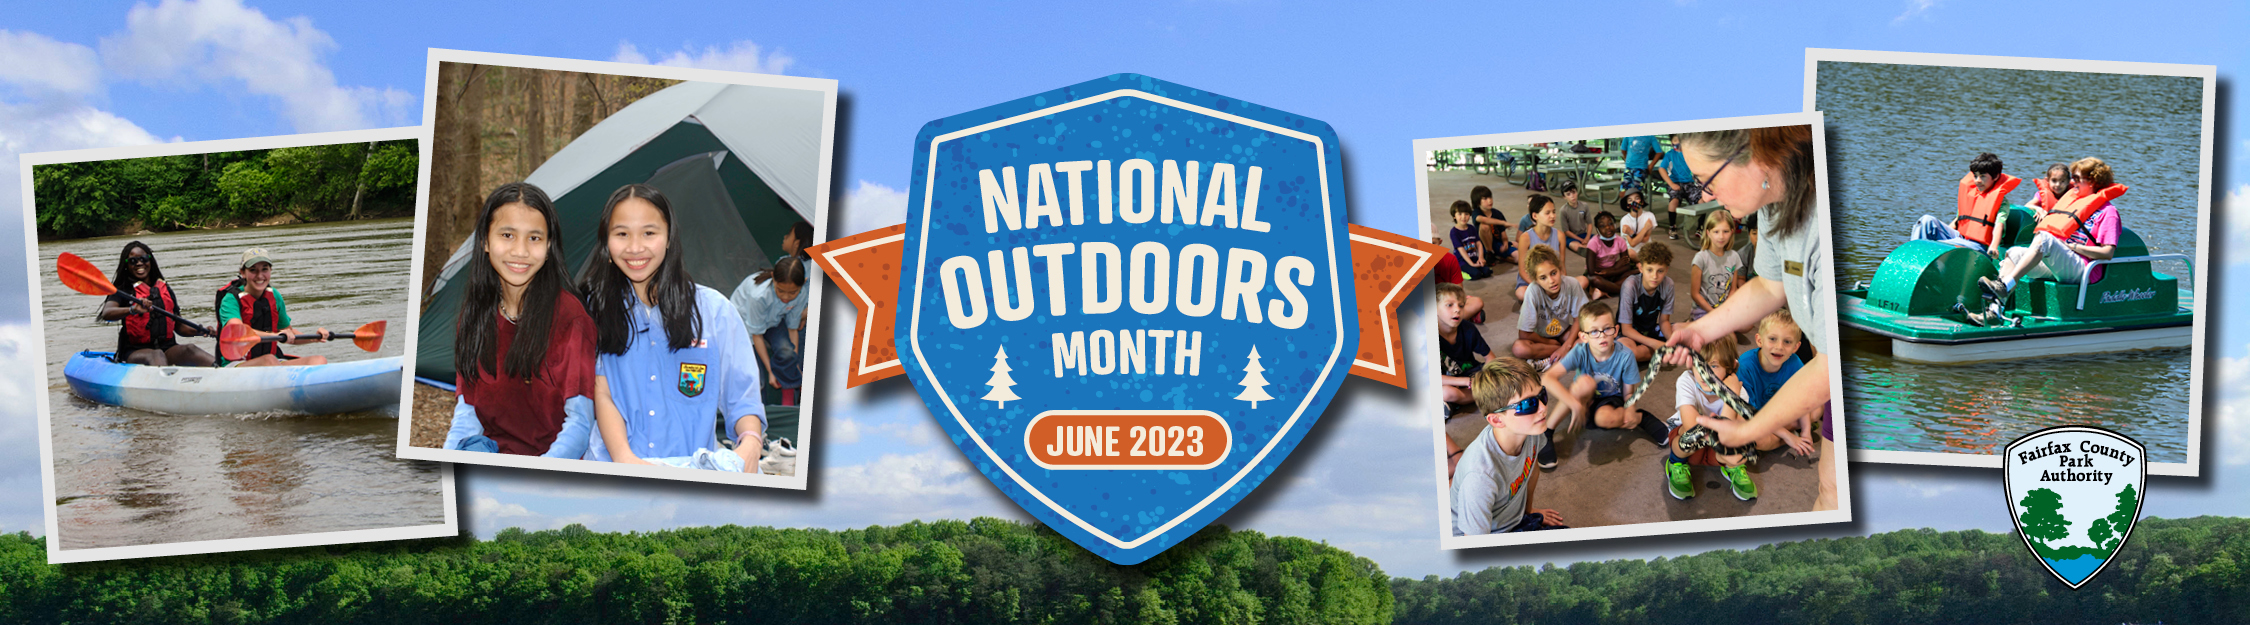 National Great Outdoors Month banner with images of people recreating outdoors